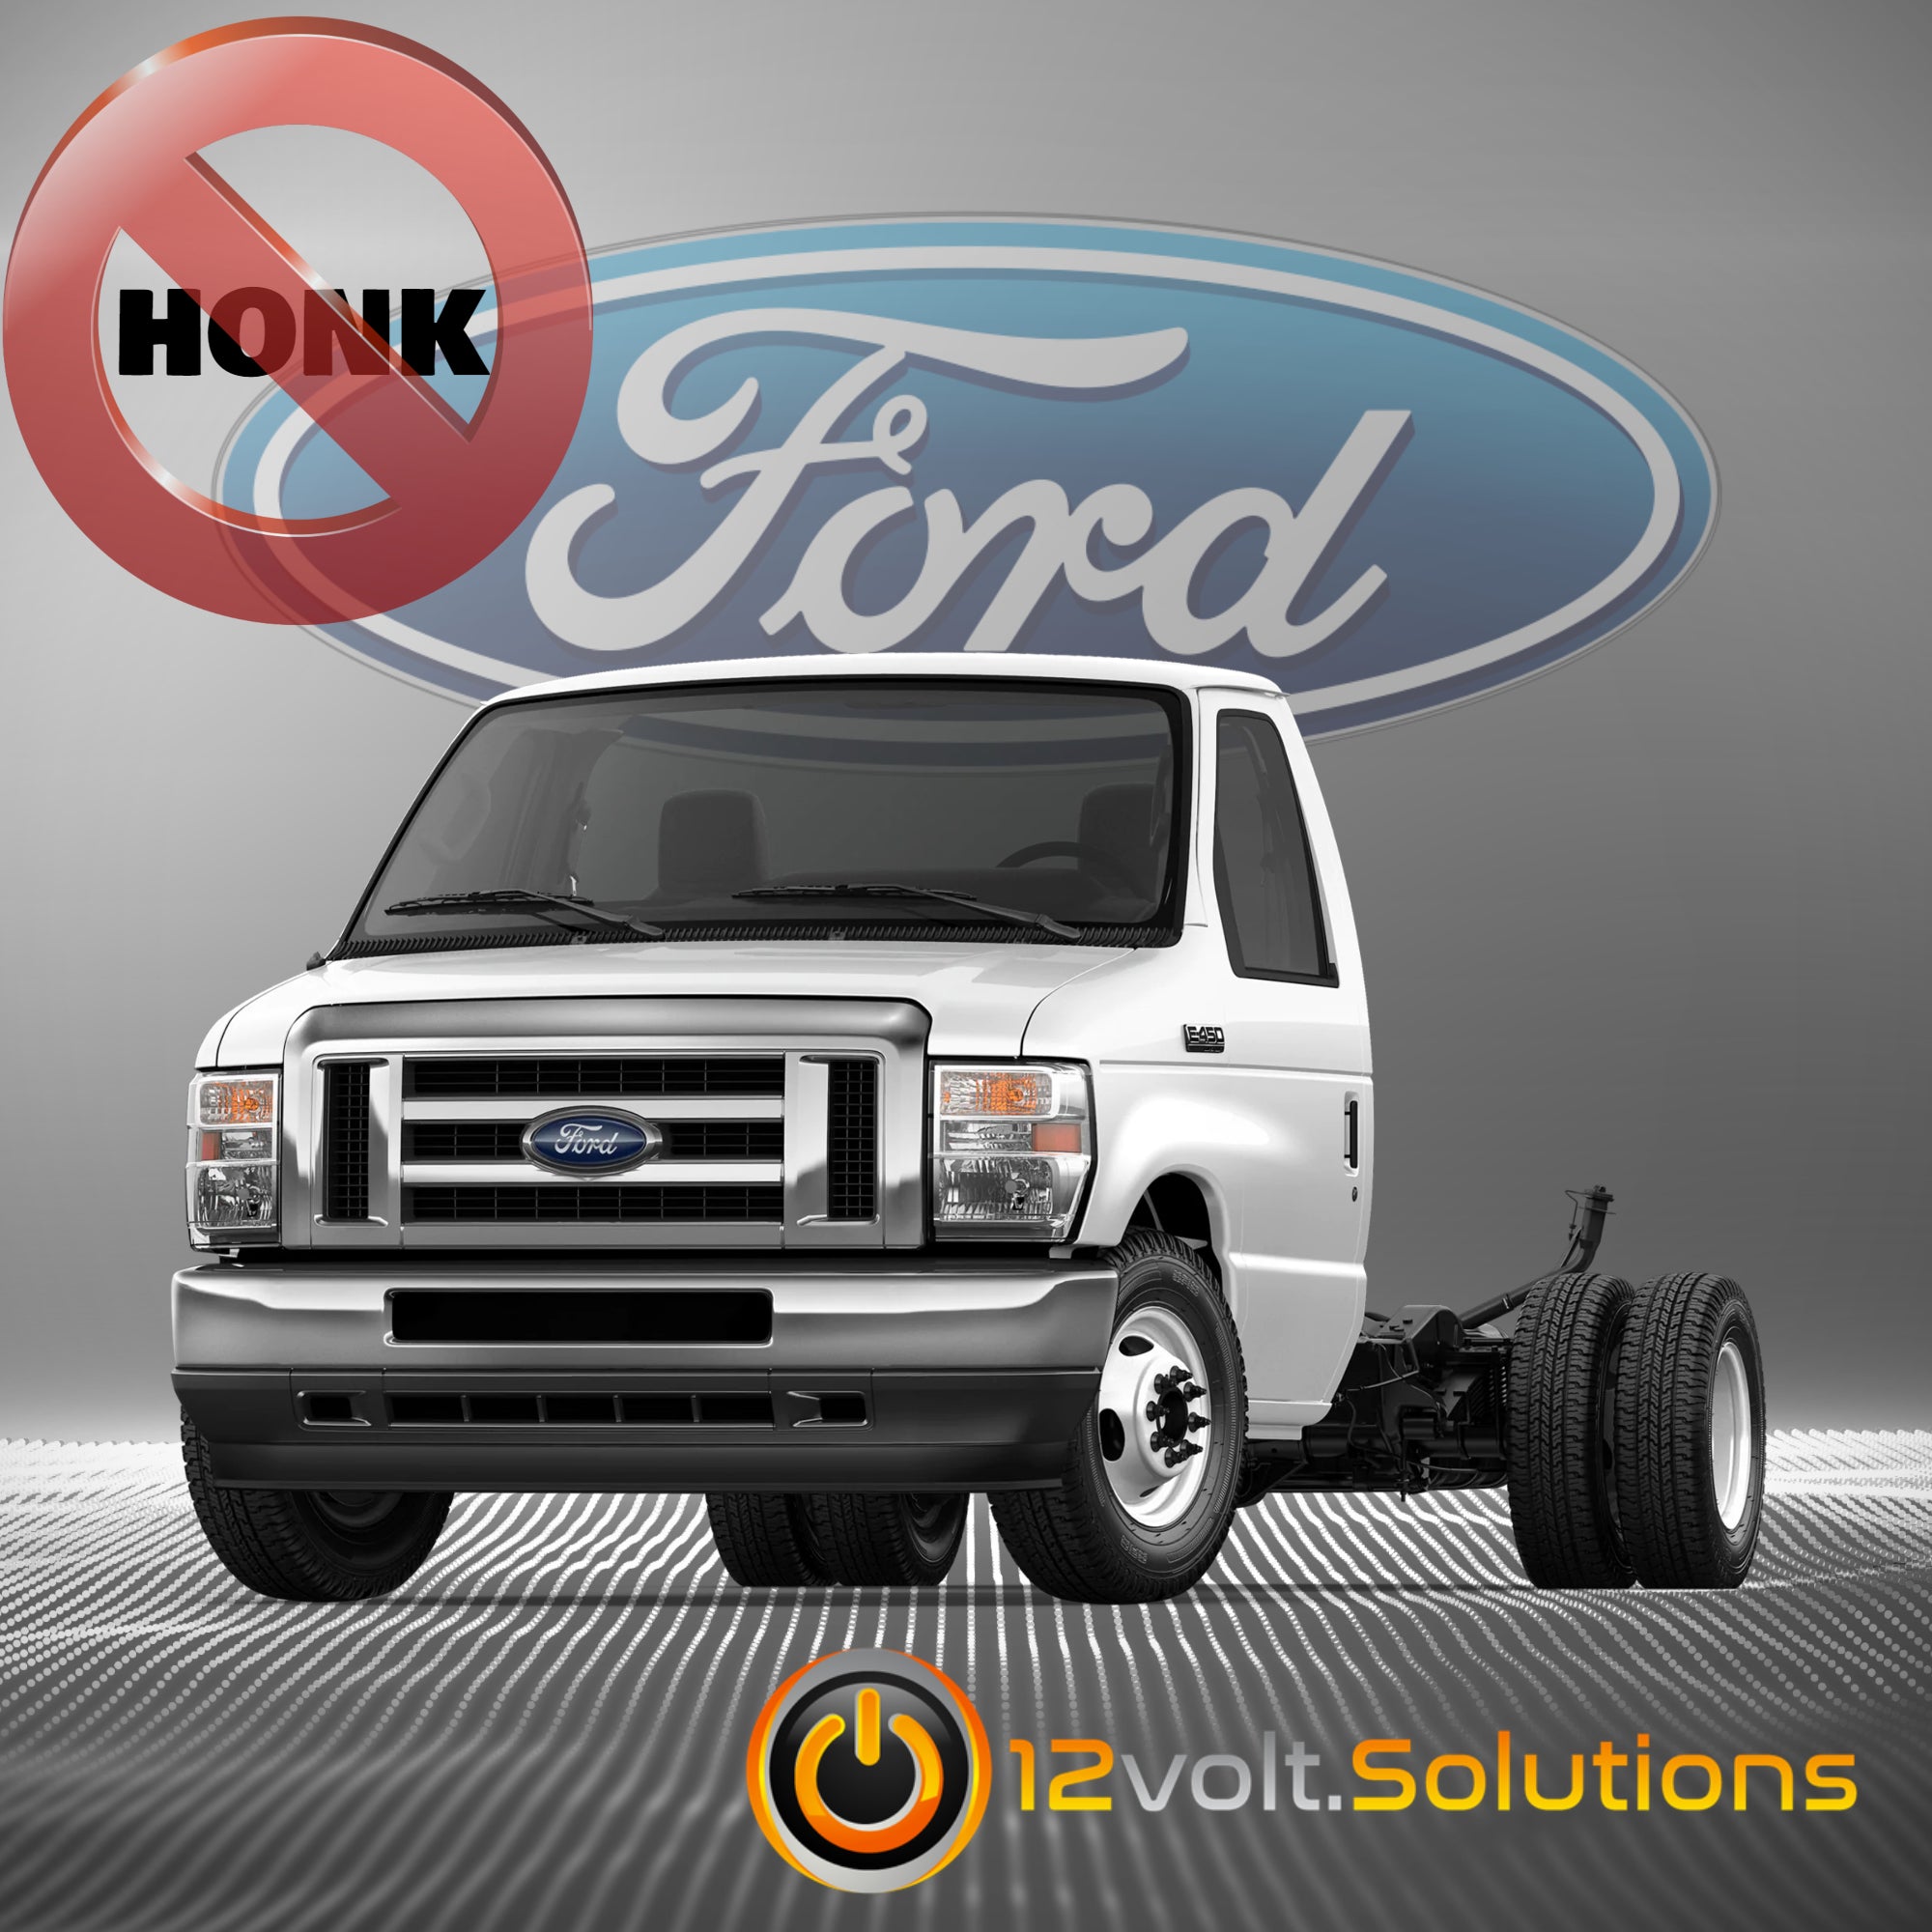 2021-2022 Ford E-Series Remote Start Plug and Play Kit - NO HORN HONK-12Volt.Solutions